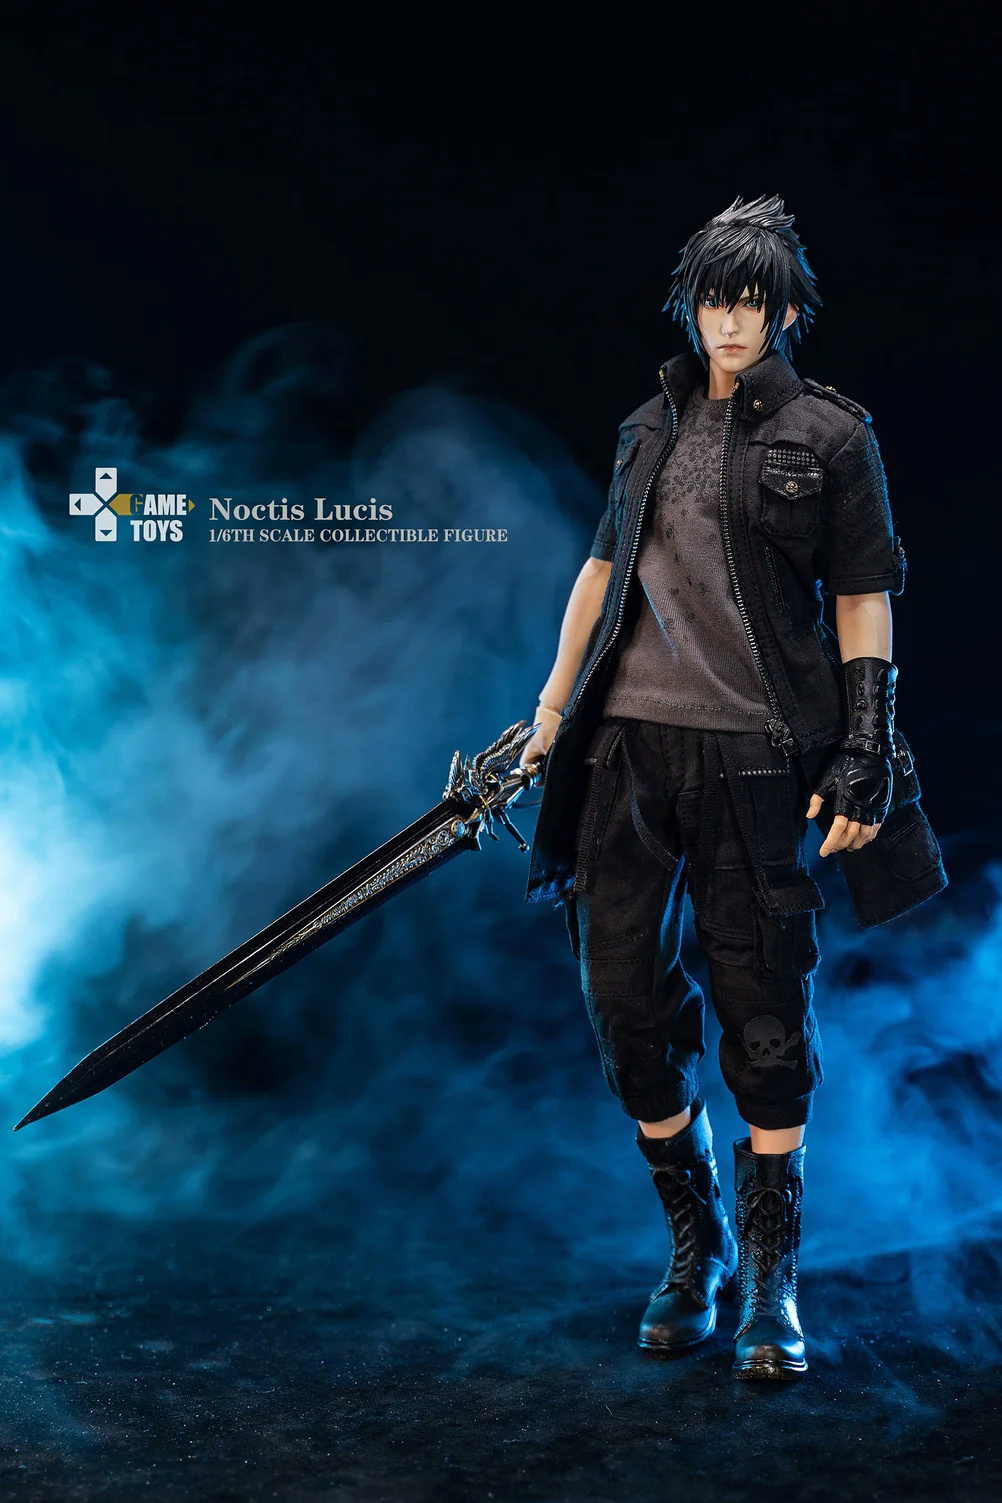 GameToys - NEW PRODUCT: Gametoys Noctis Lucis, additional accessories, and throne 15_web10